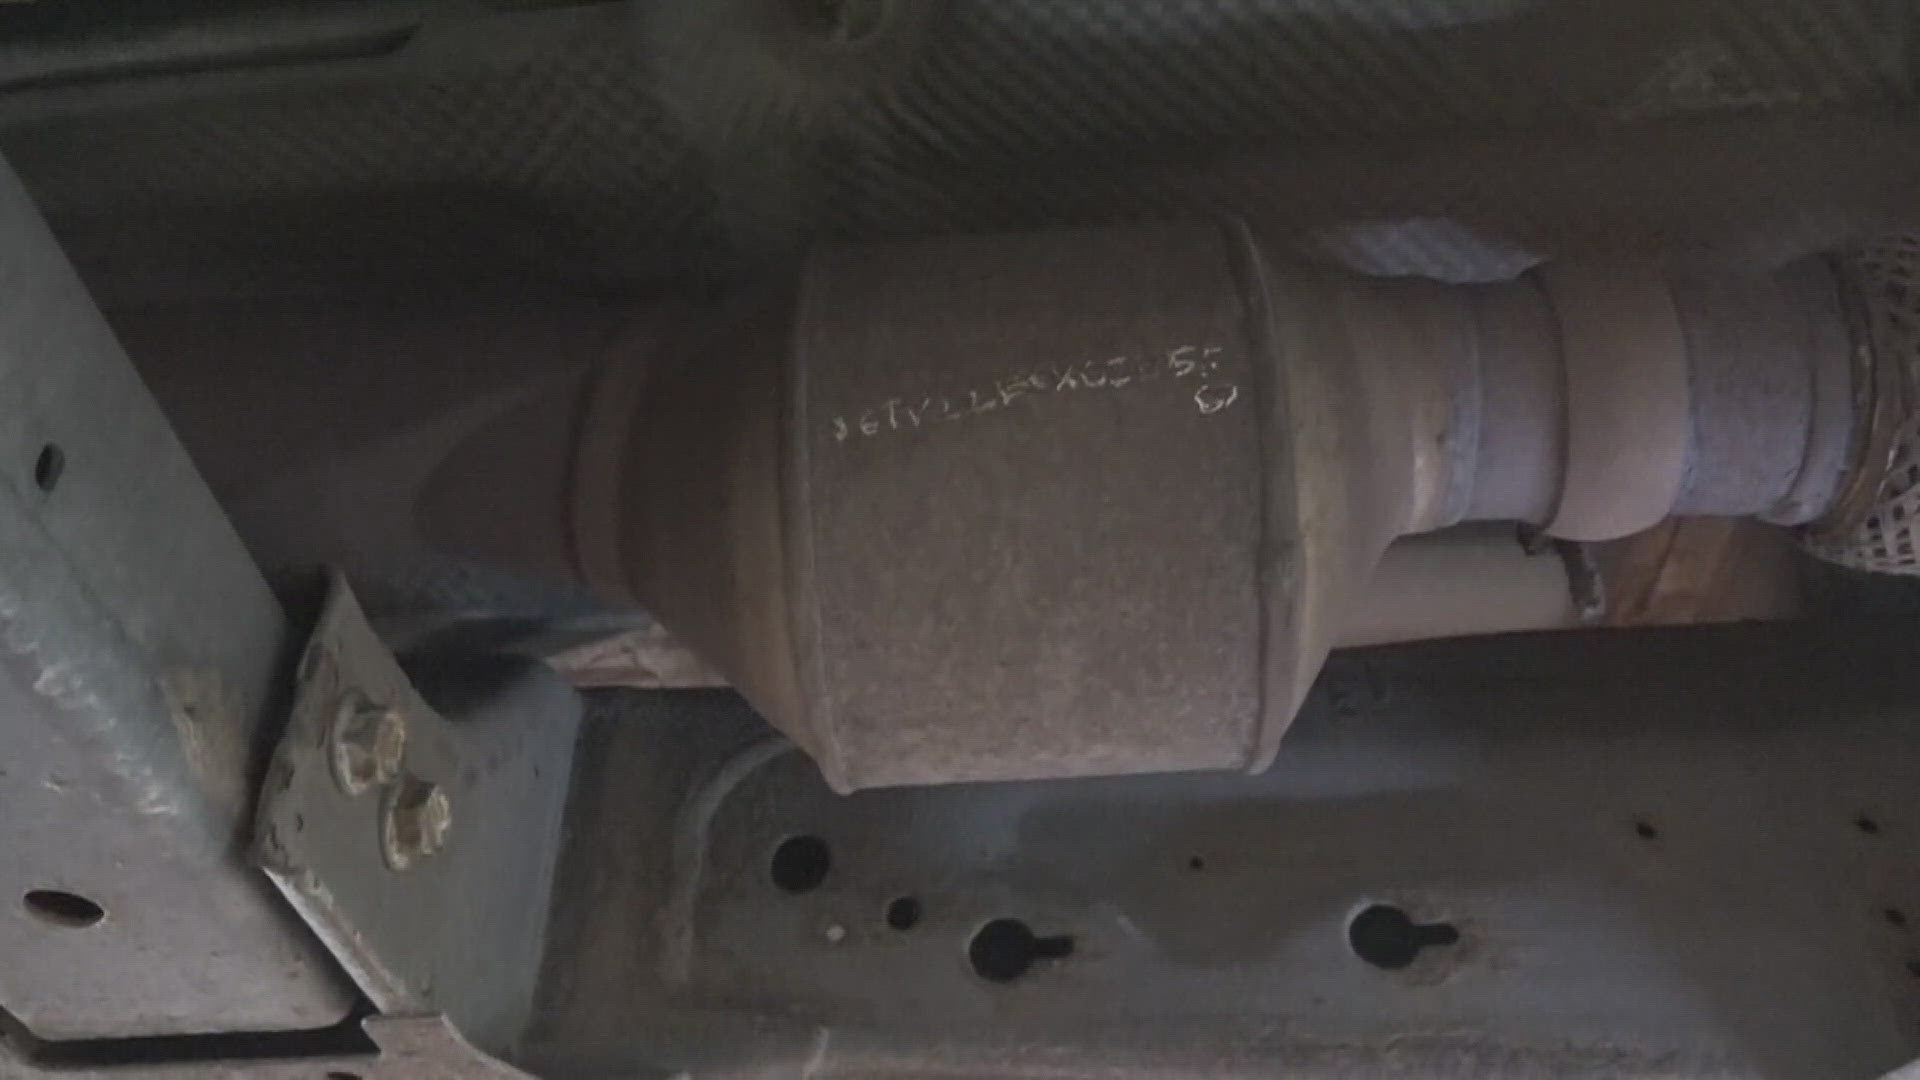 Catalytic converters can be a target for theft and cost hundreds, if not thousands of dollars to replace.